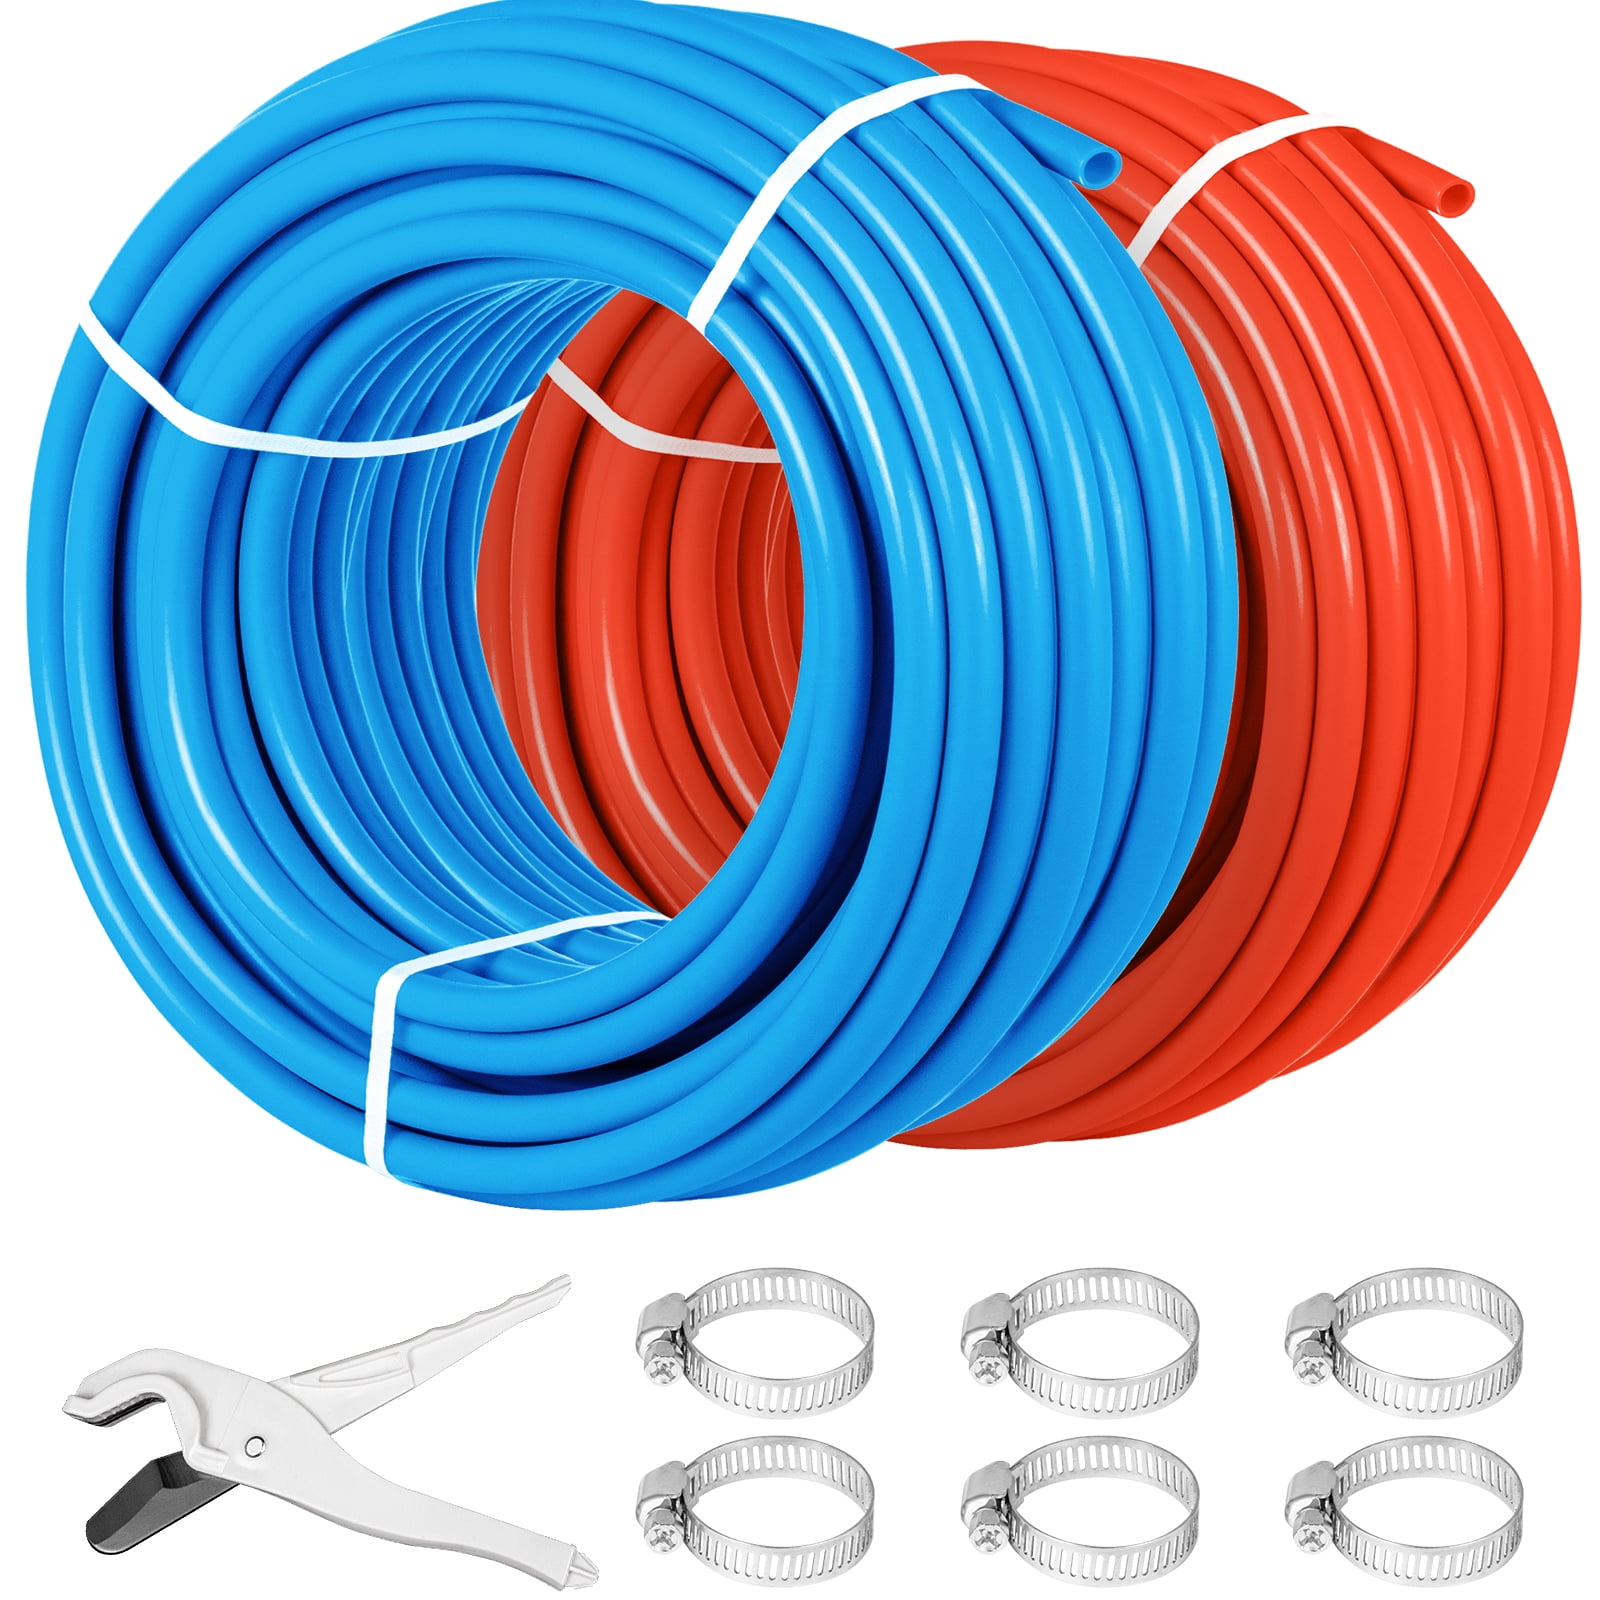 RED Certified Non-Barrier PEX Tubing Htg/Plbg/Potable Water 1/2" 500' coil 